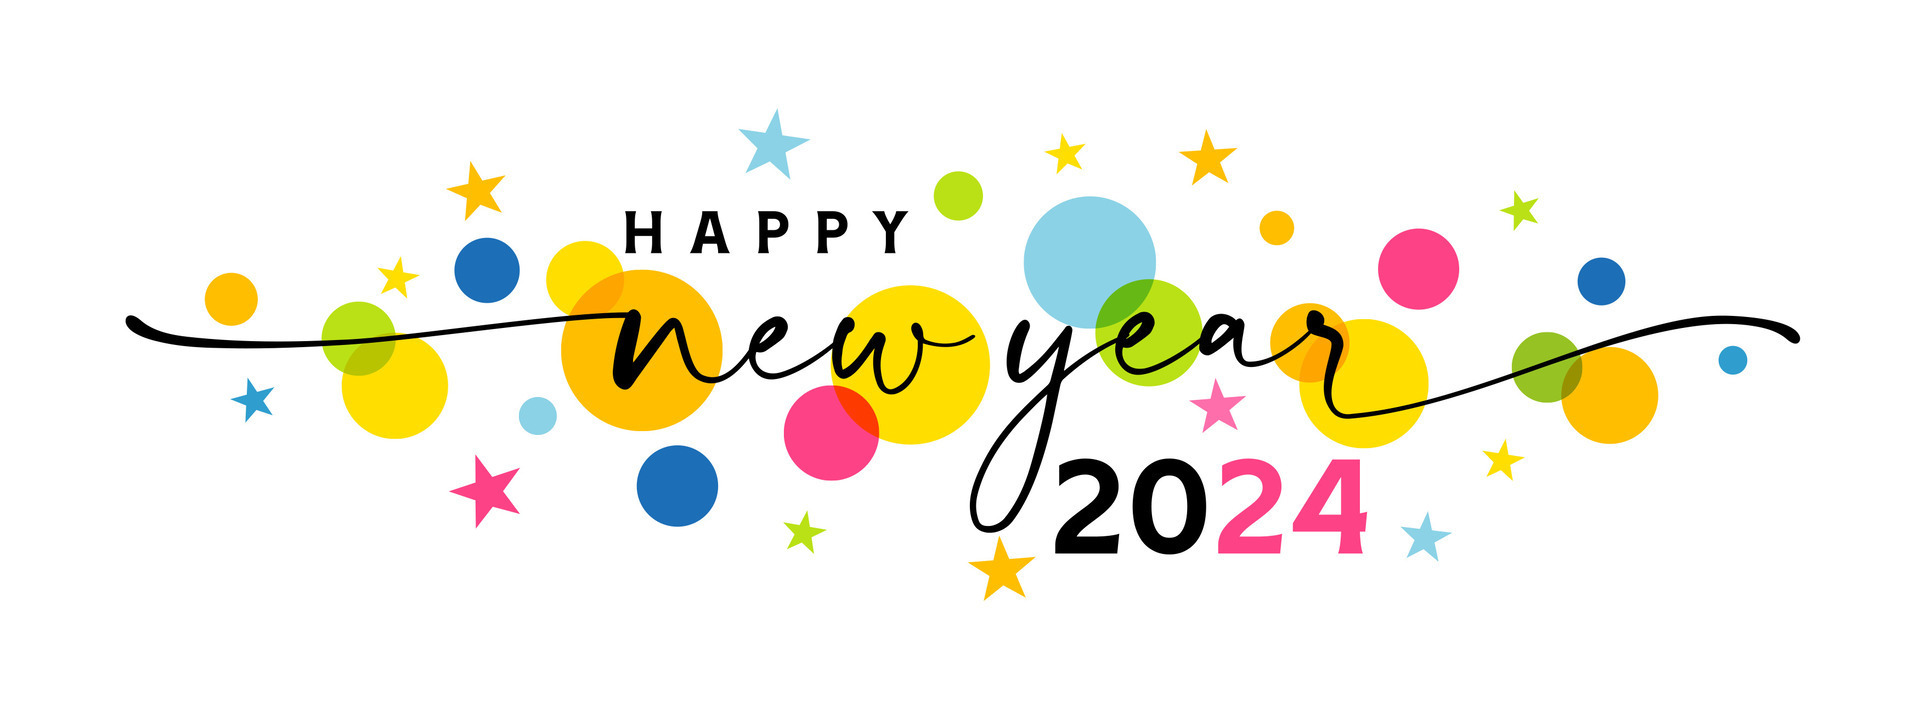 Happy new year 2024 horizontal banner with colorful elements 29132572